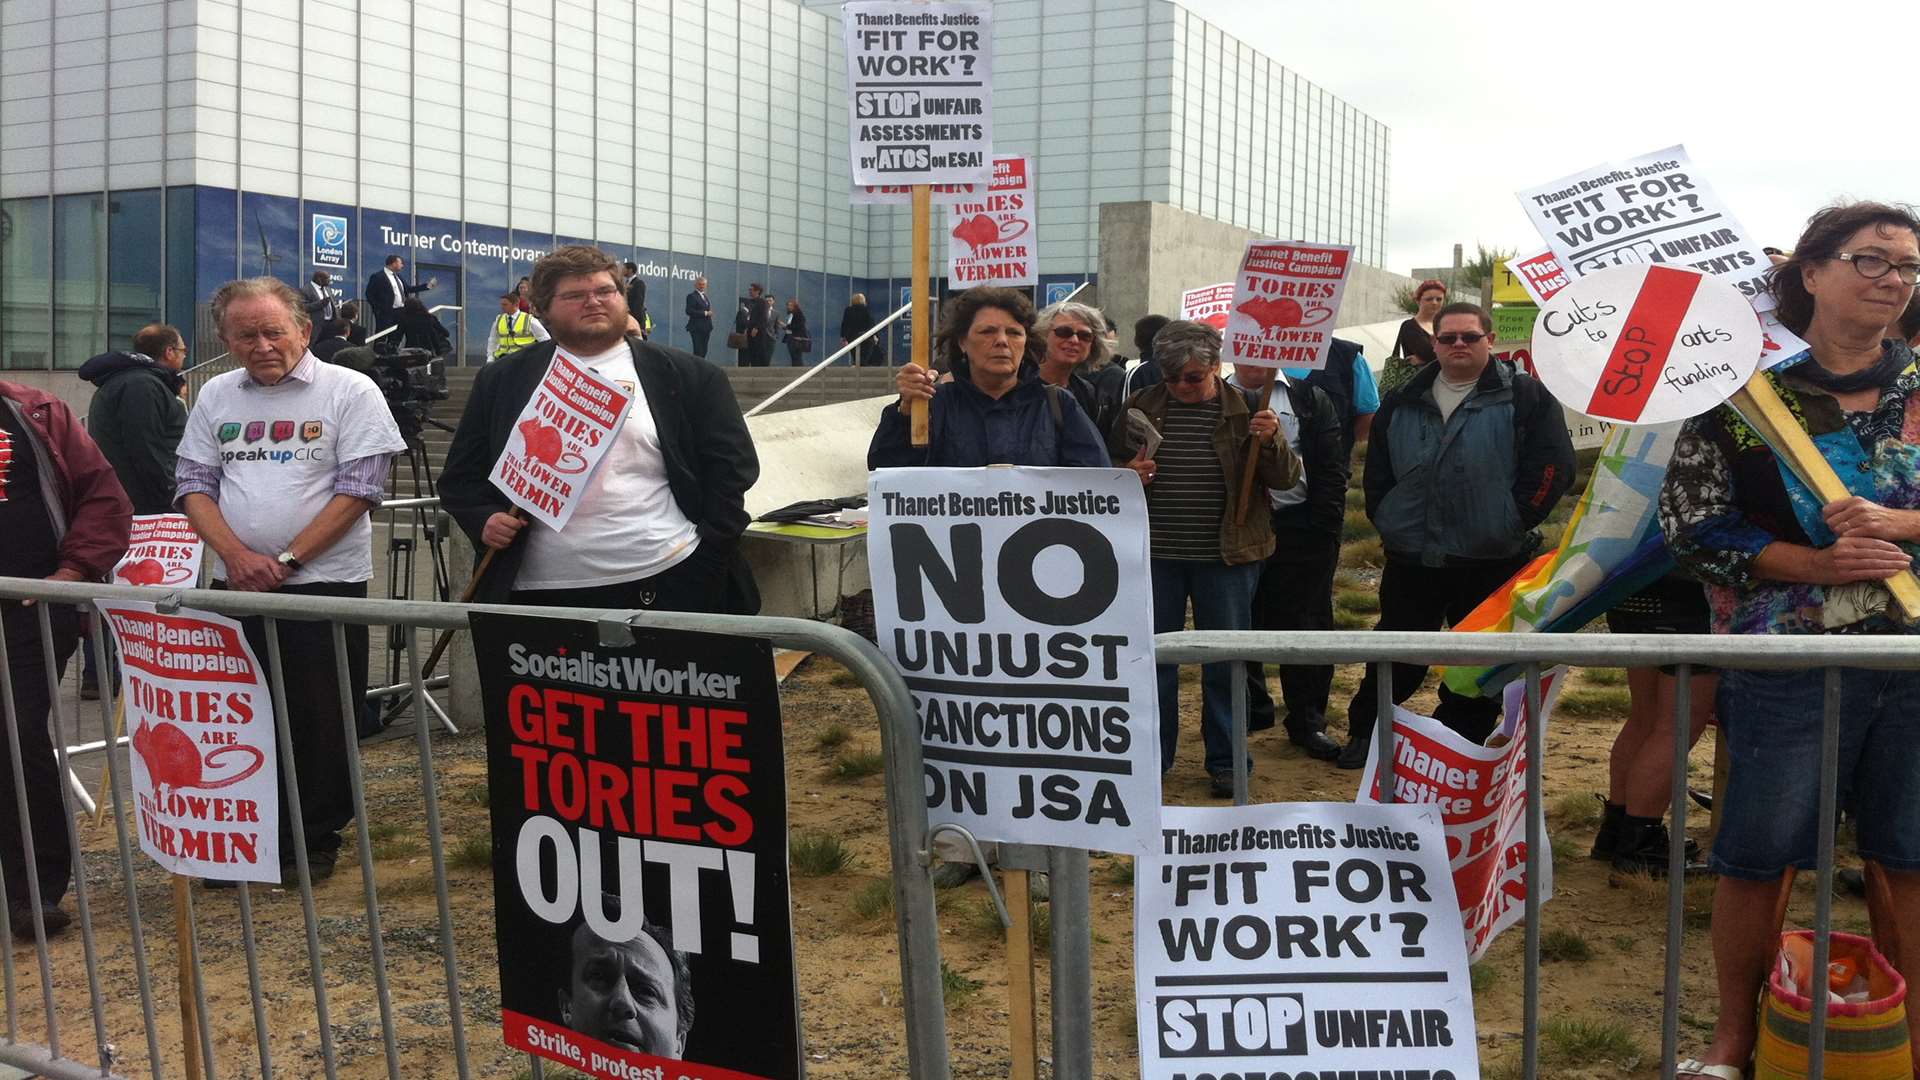 Protesters outside the Turner Contemporary Gallery in Margate. Picture: Saffron Johnson